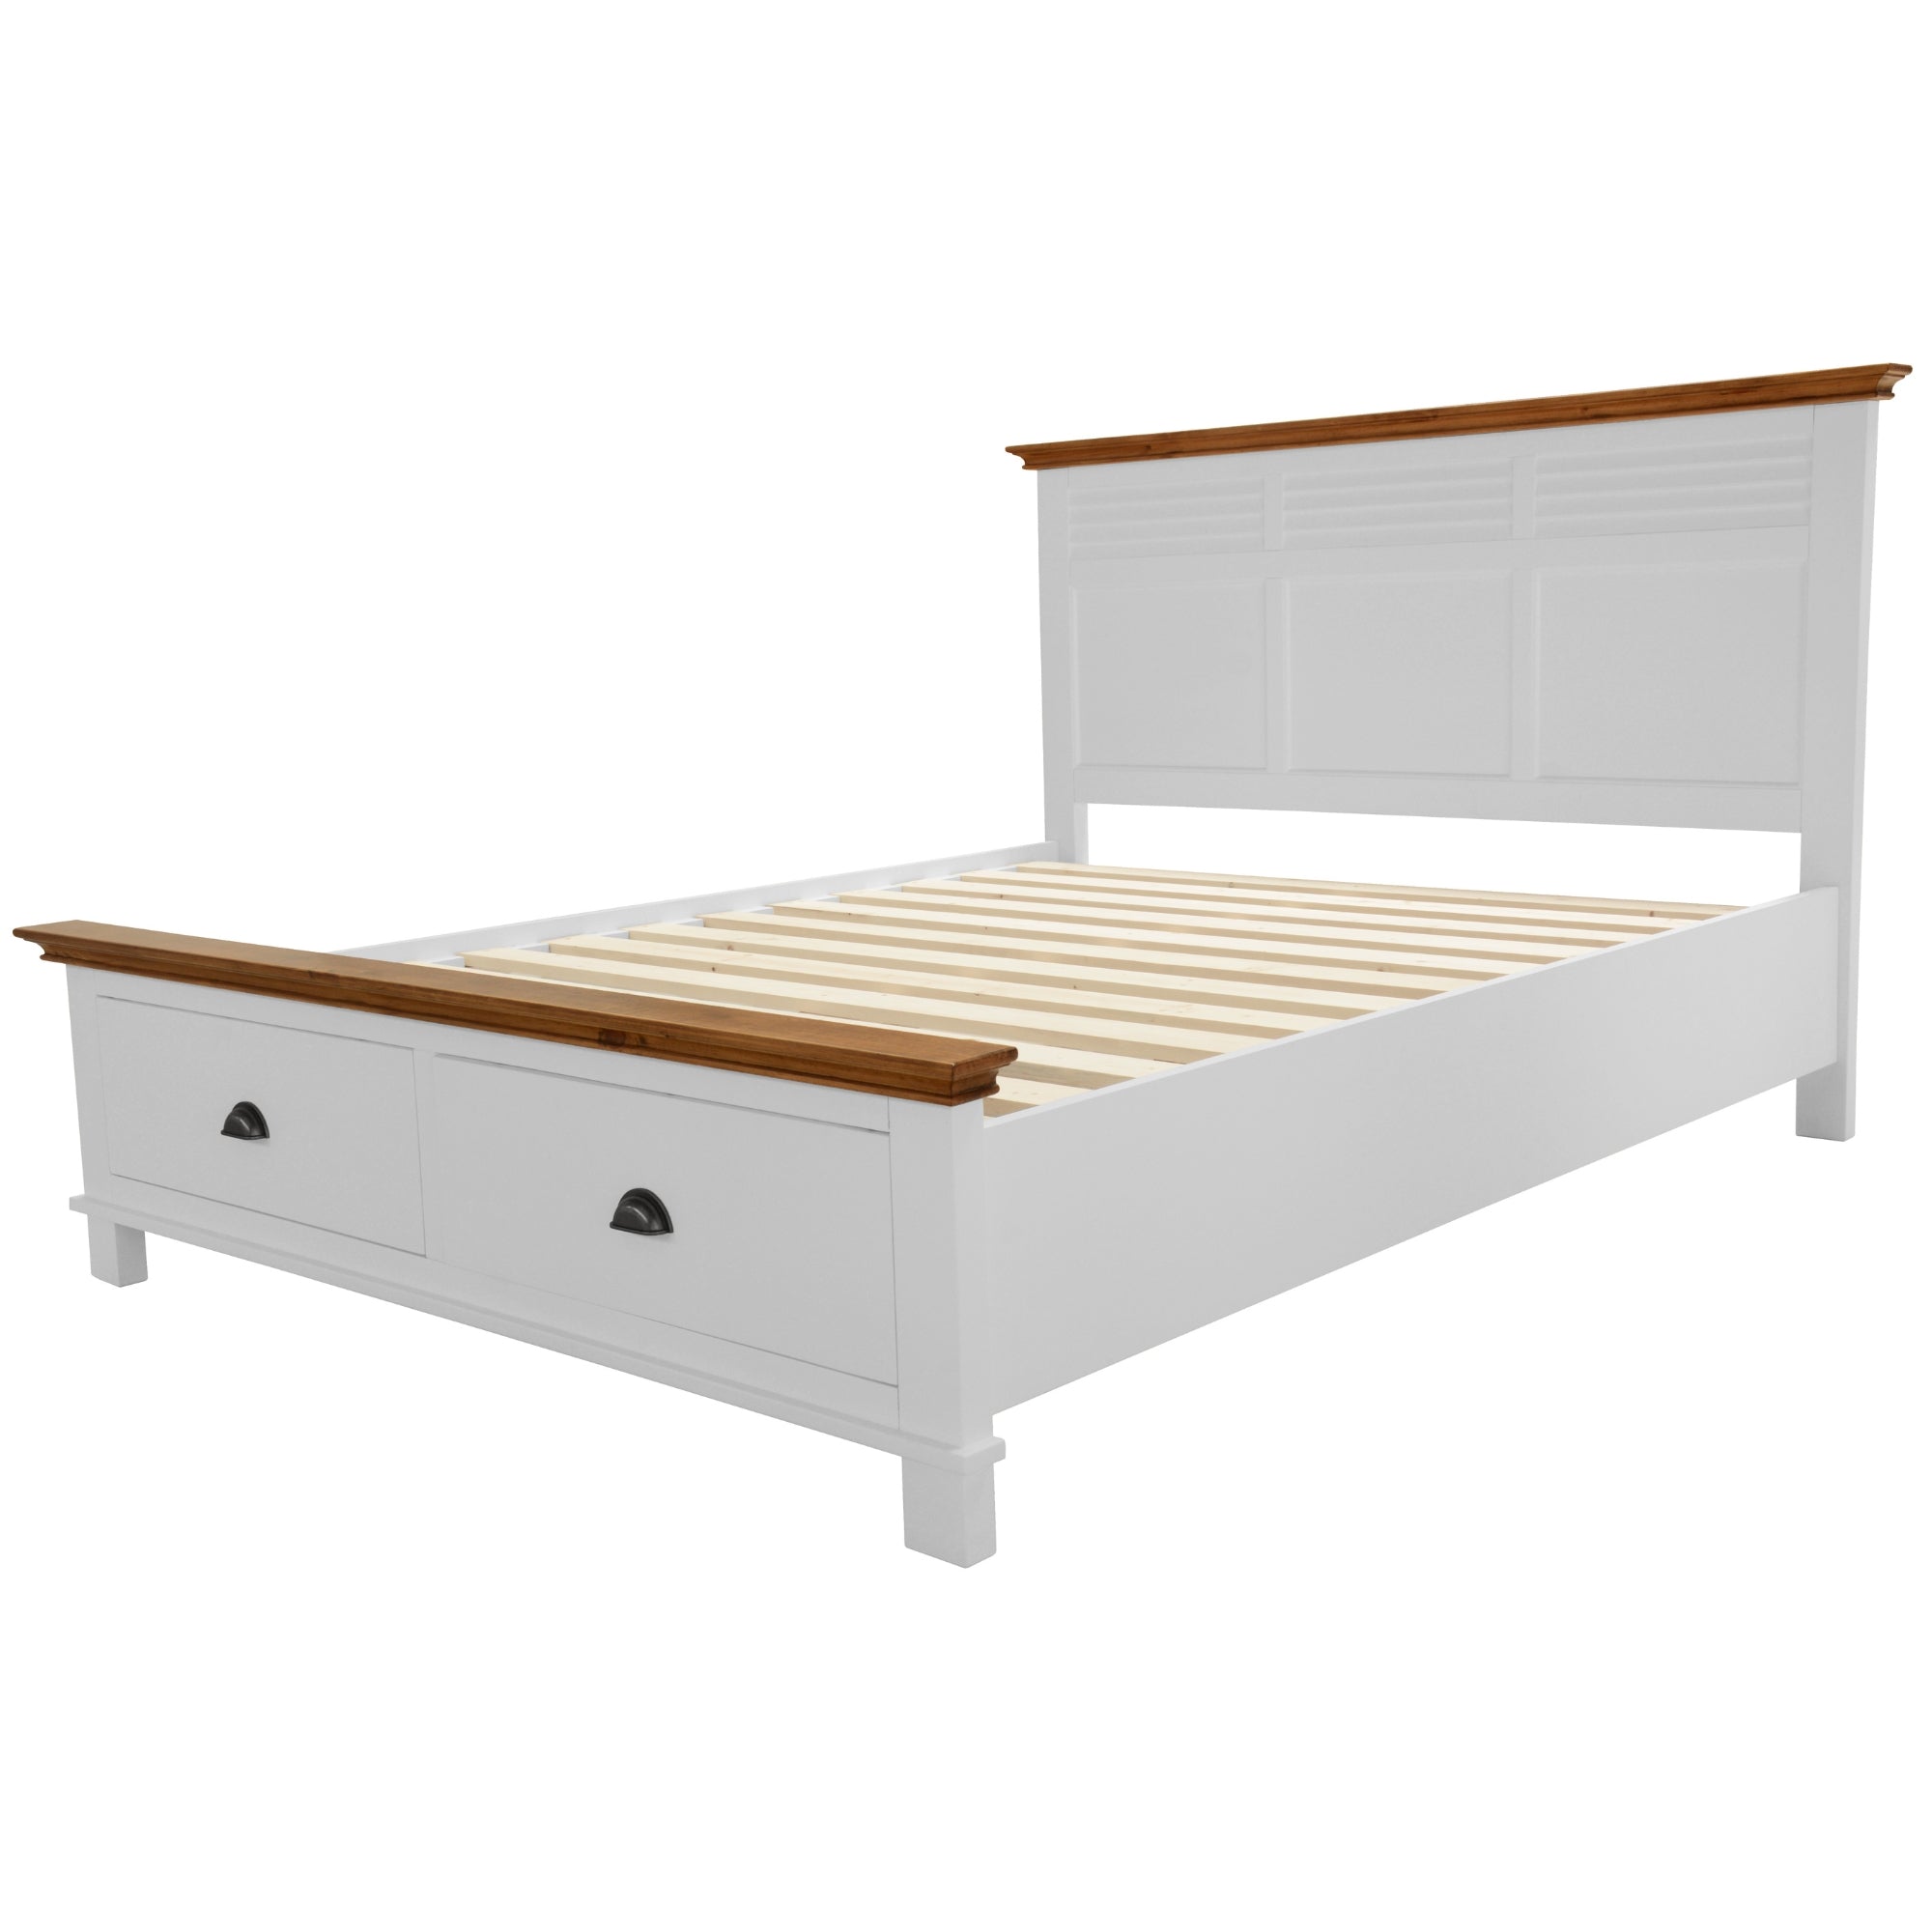 King Bed with Drawers, Panelled Headboard, Solid Pine